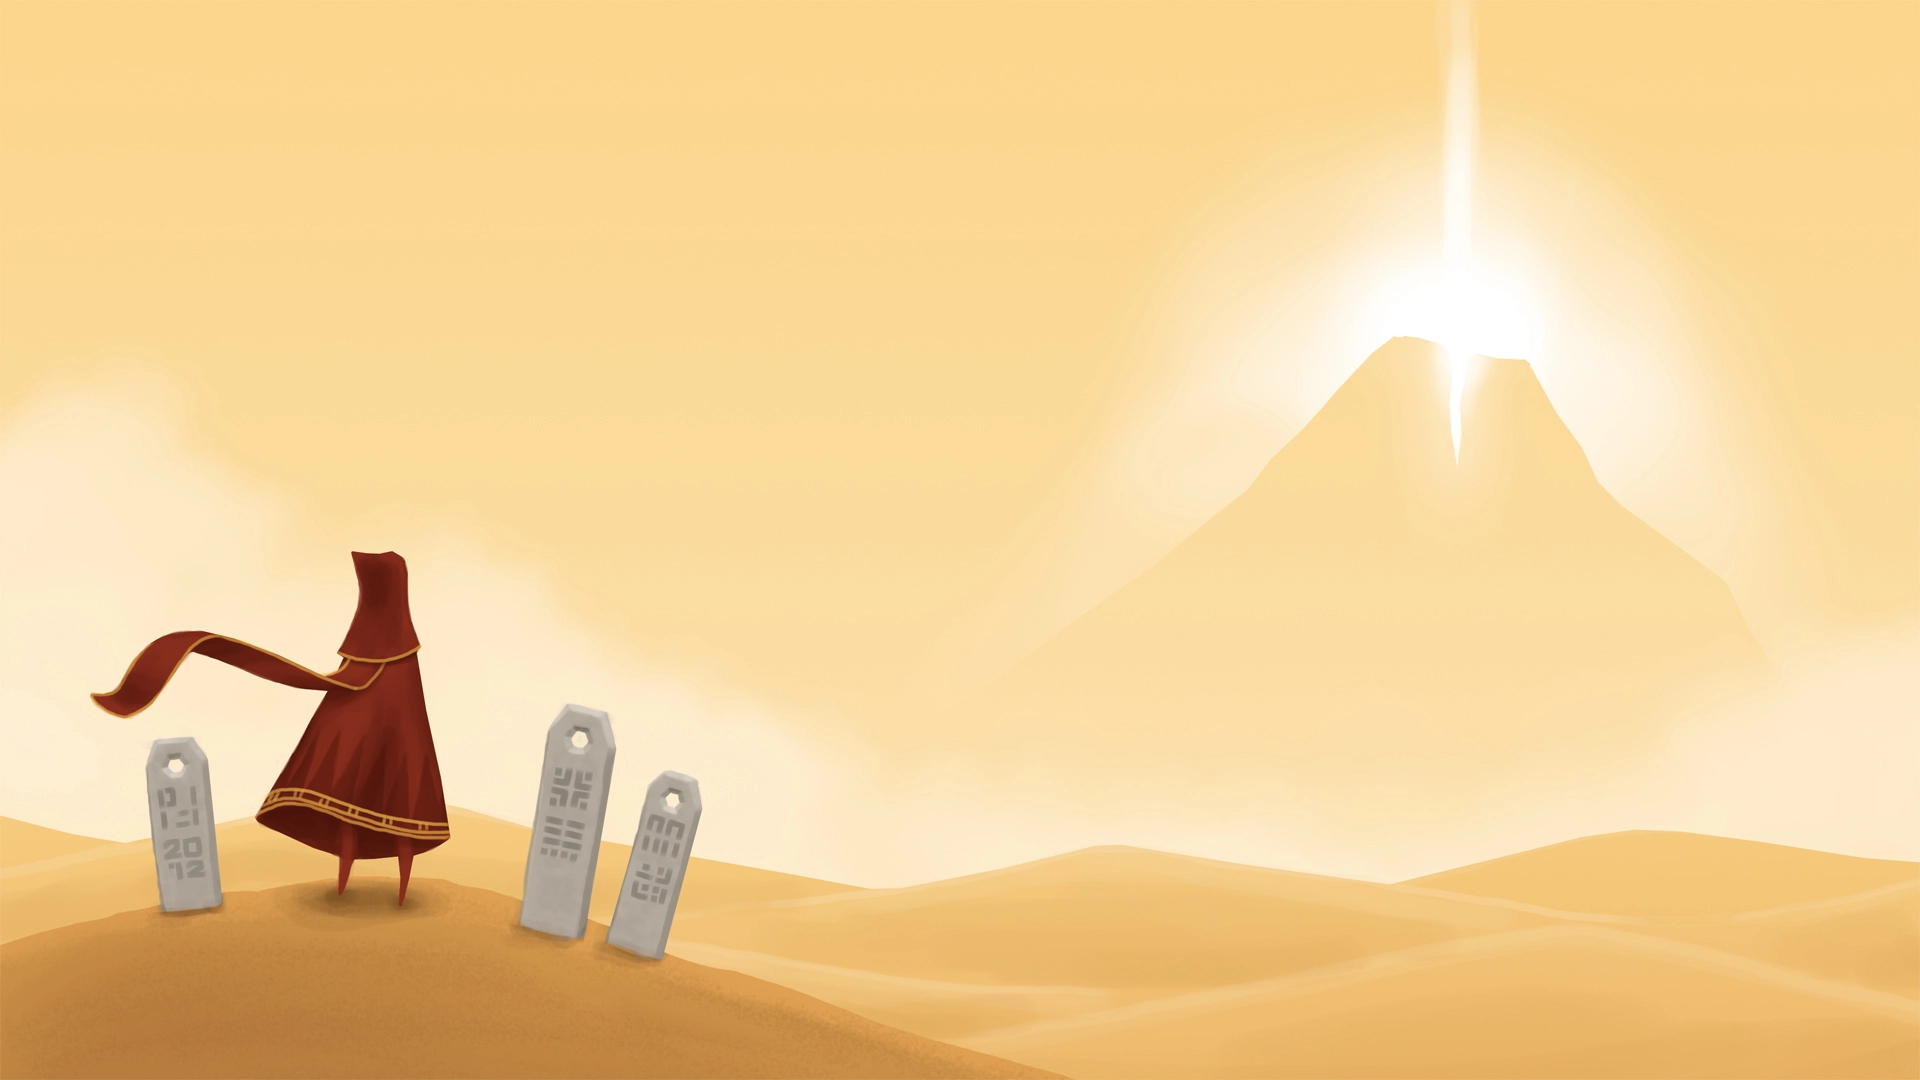 Critically acclaimed adventure game Journey comes to Steam in summer